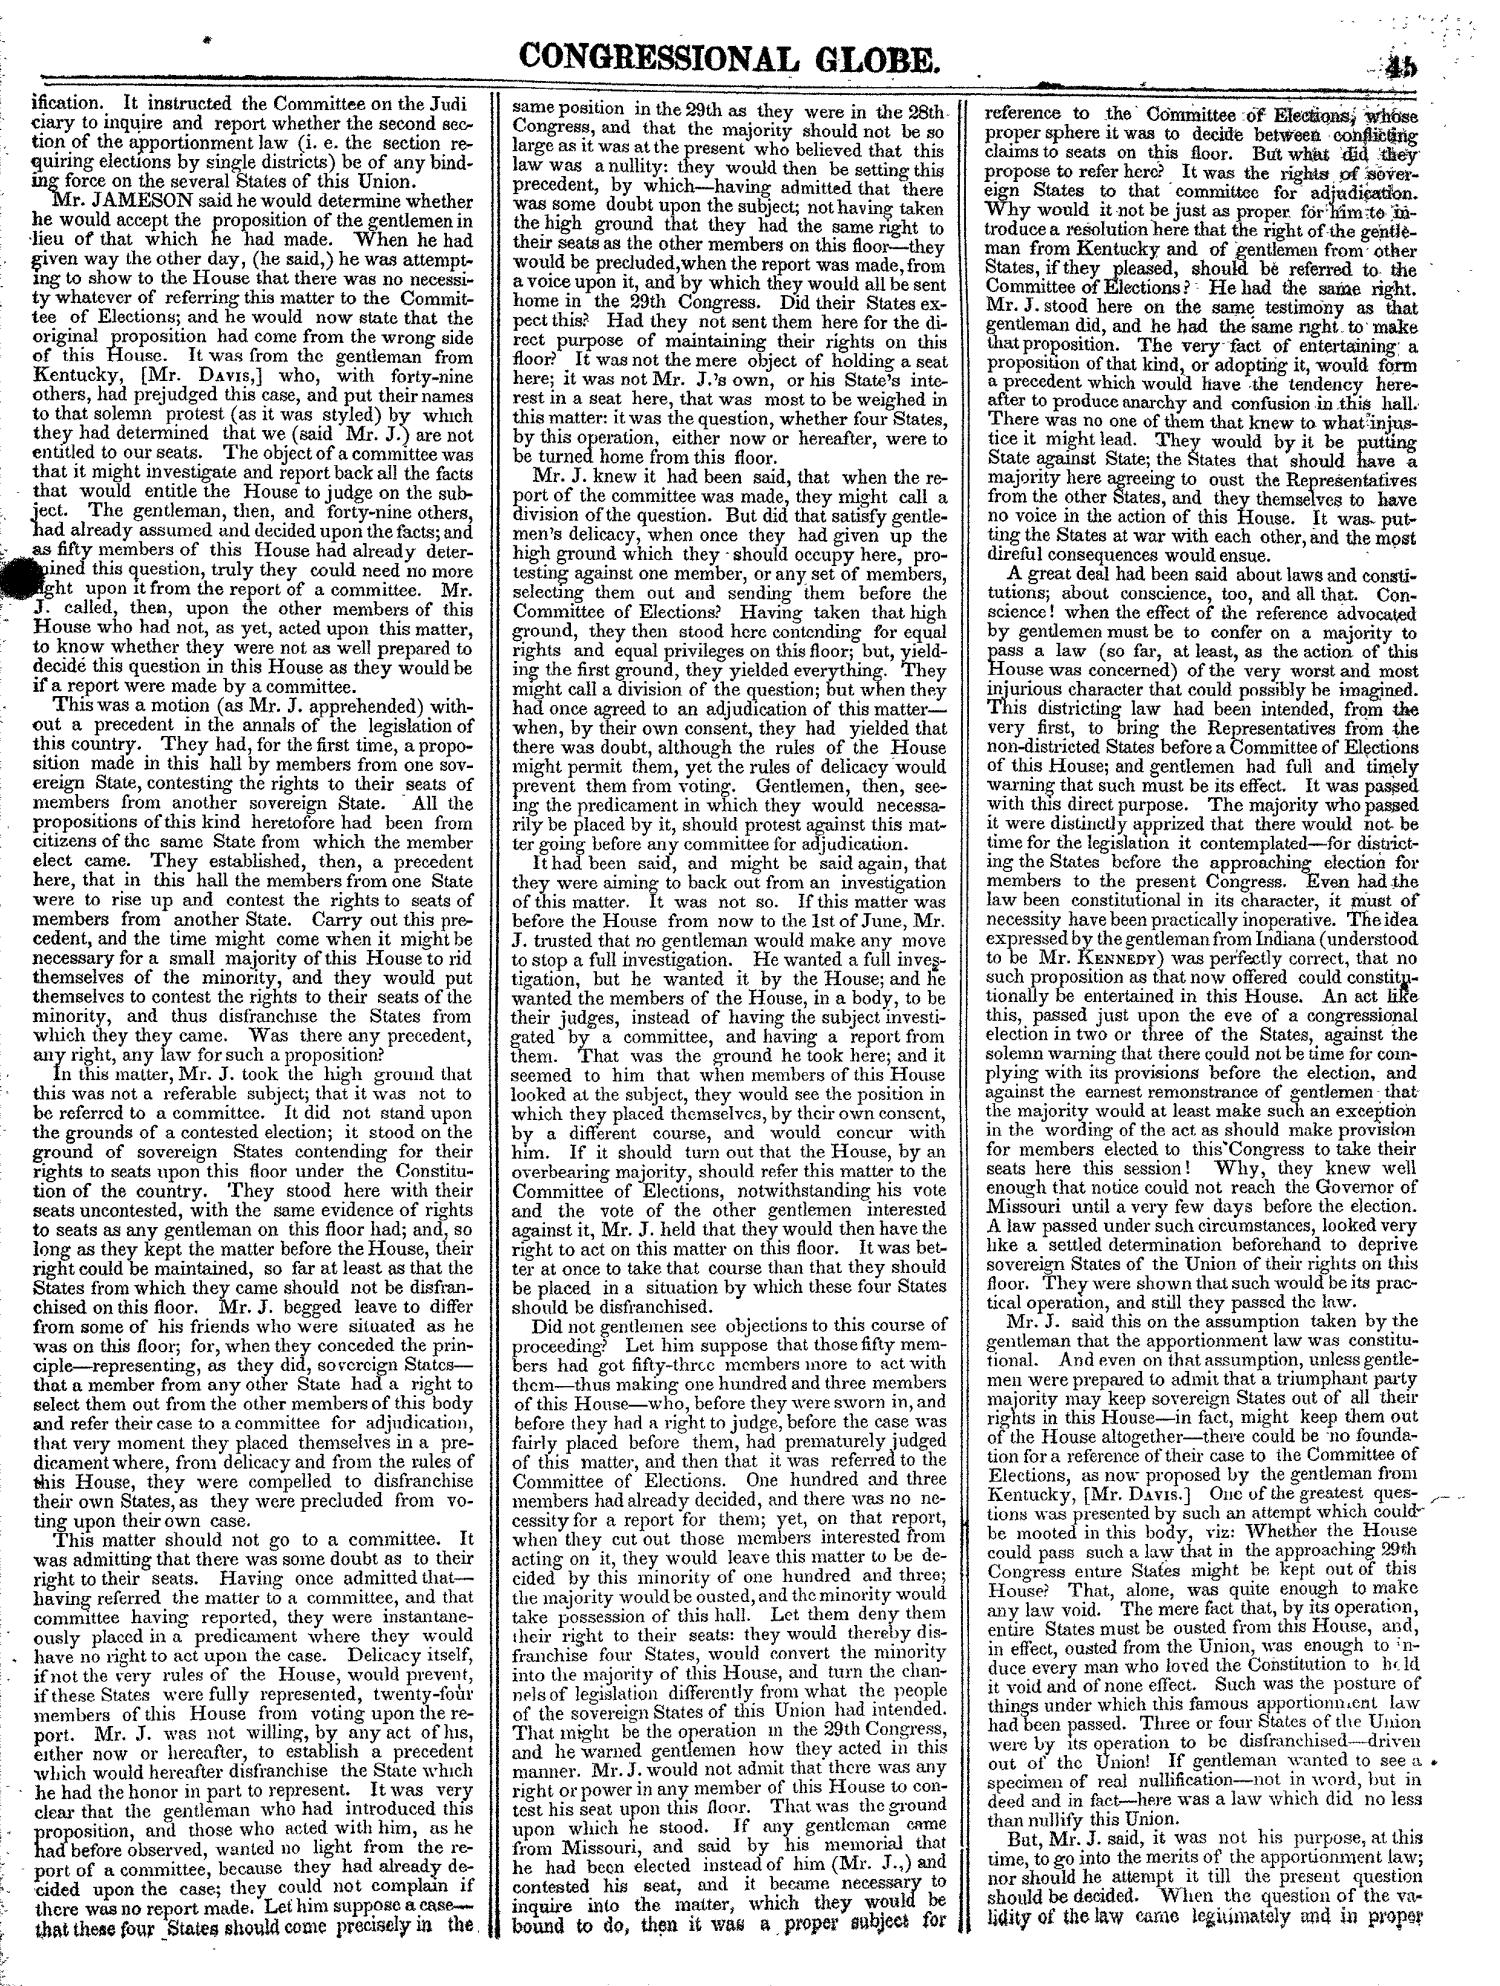 The Congressional Globe, Volume 13, Part 1: Twenty-Eighth Congress, First Session
                                                
                                                    45
                                                